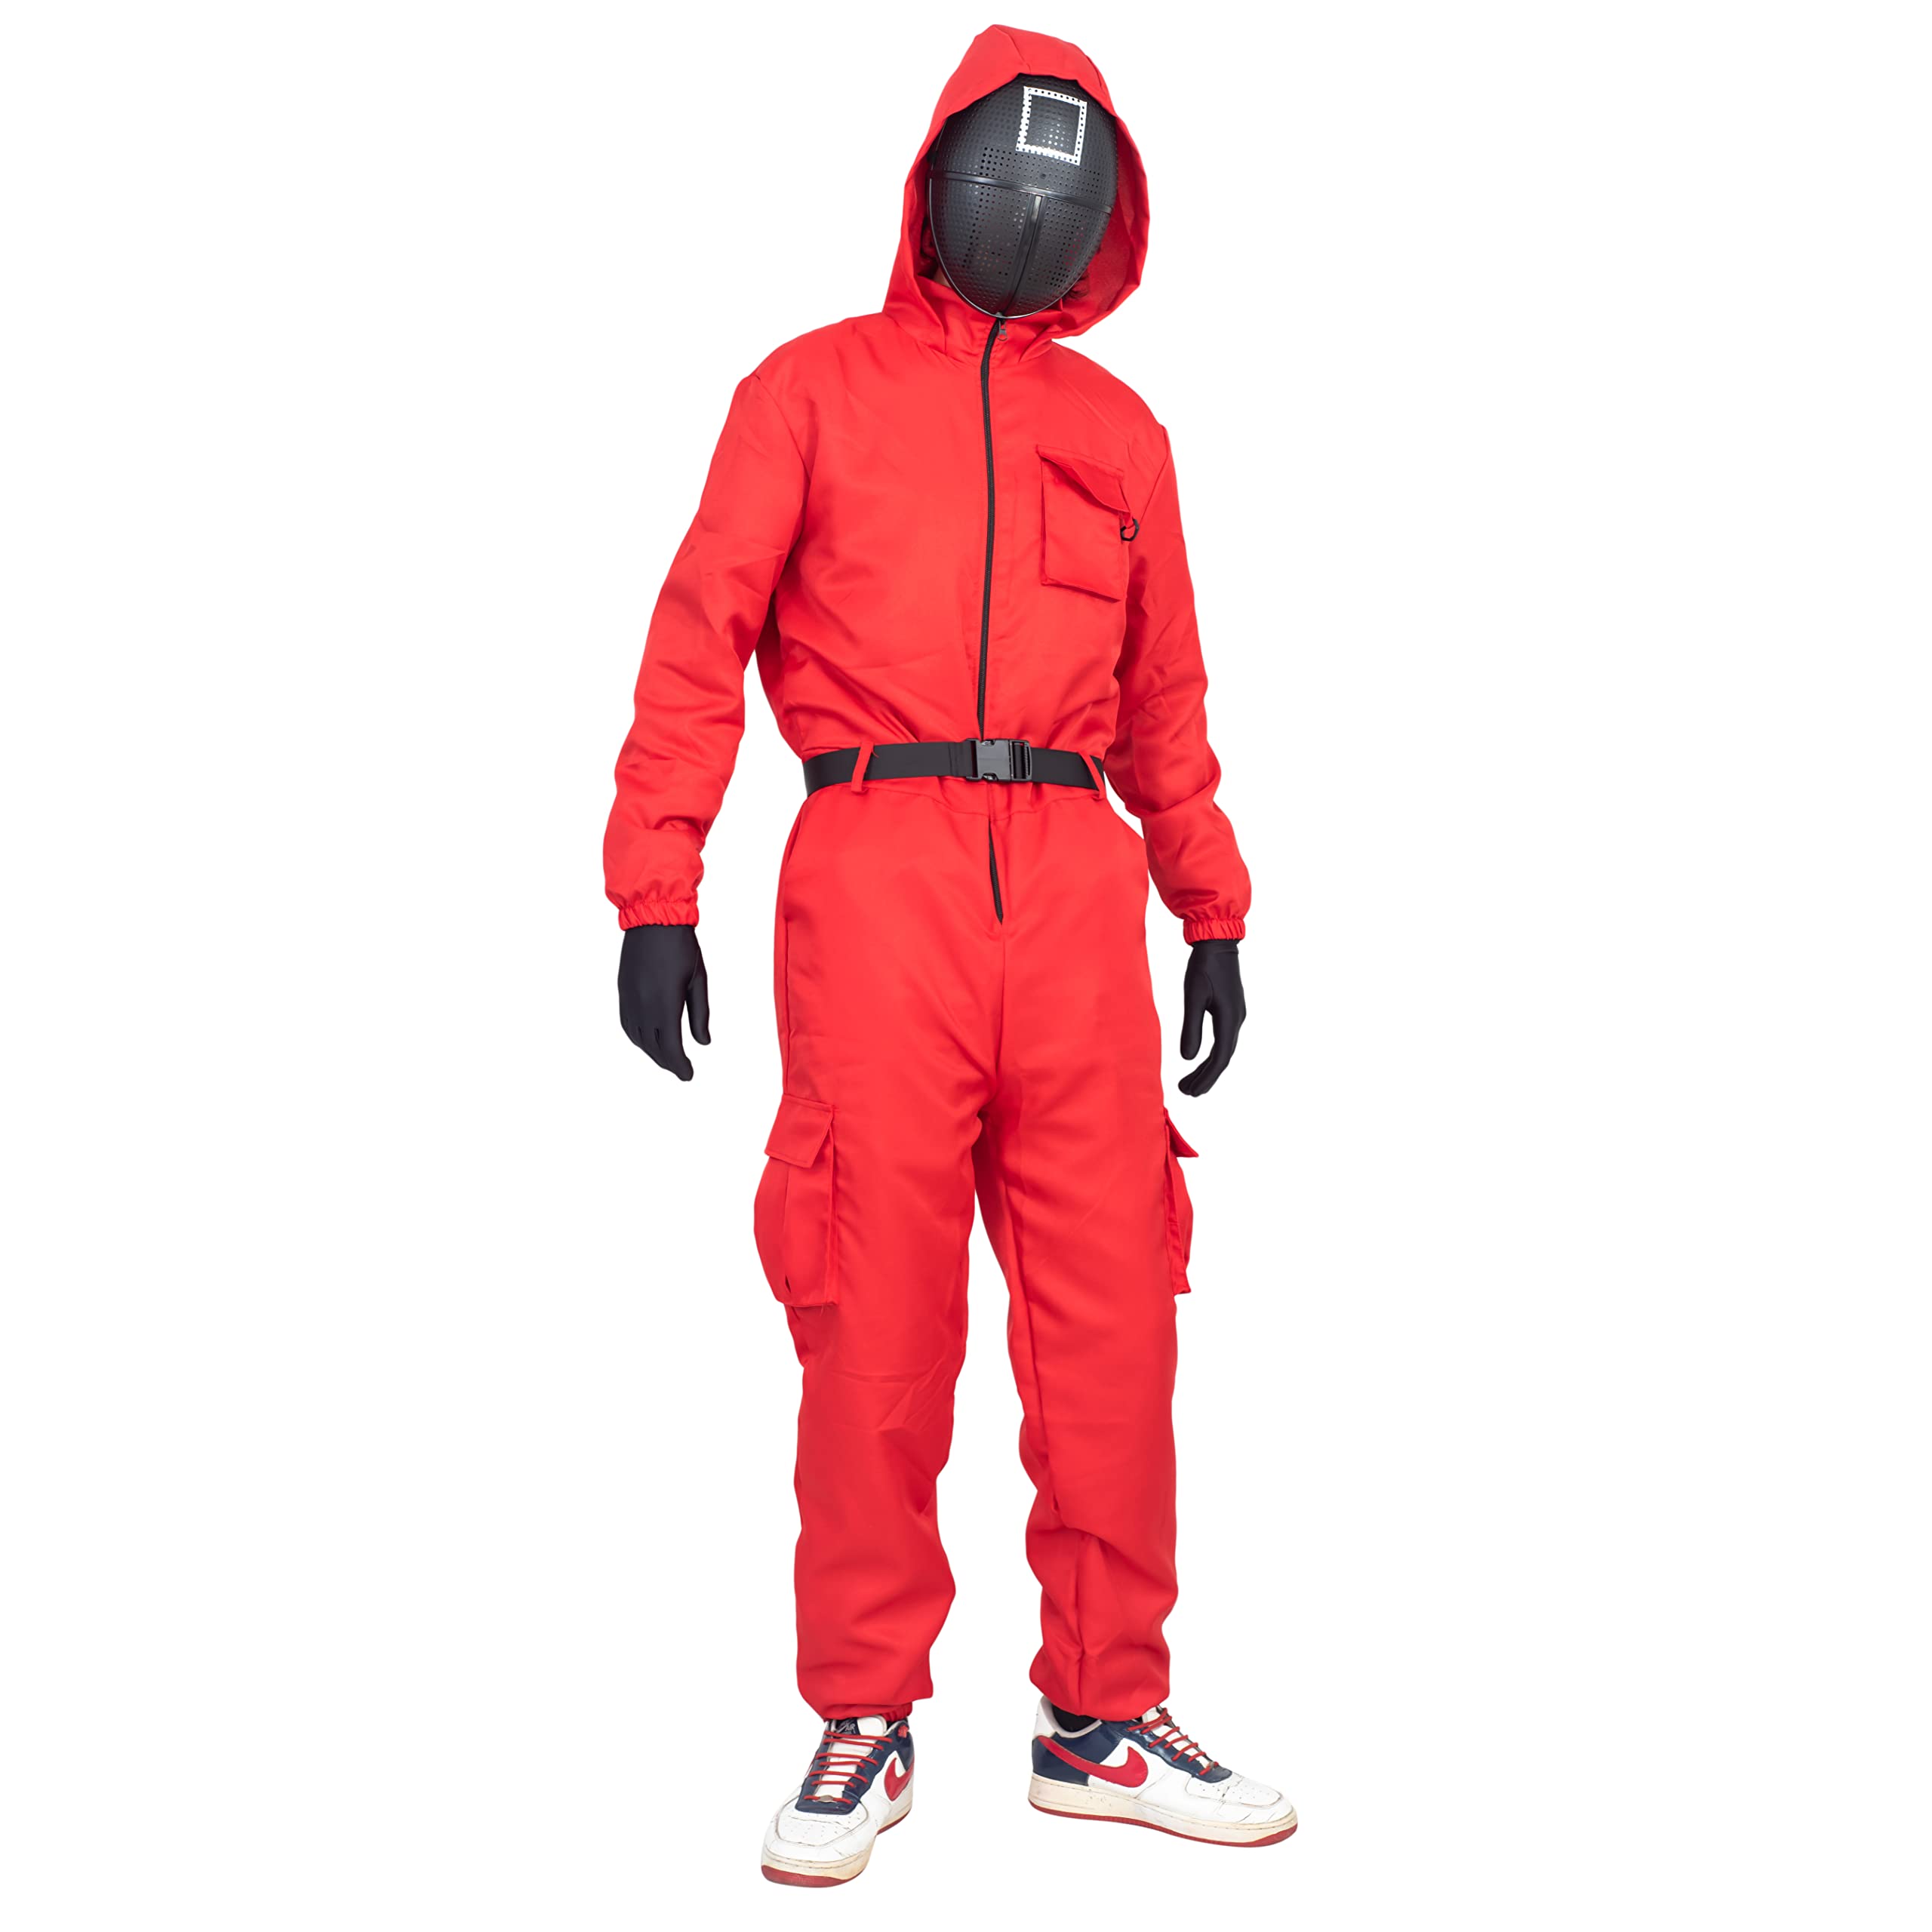 Costume Agent Squid costume Red Jumpsuit with Mask Belt and gloves Halloween cosplay